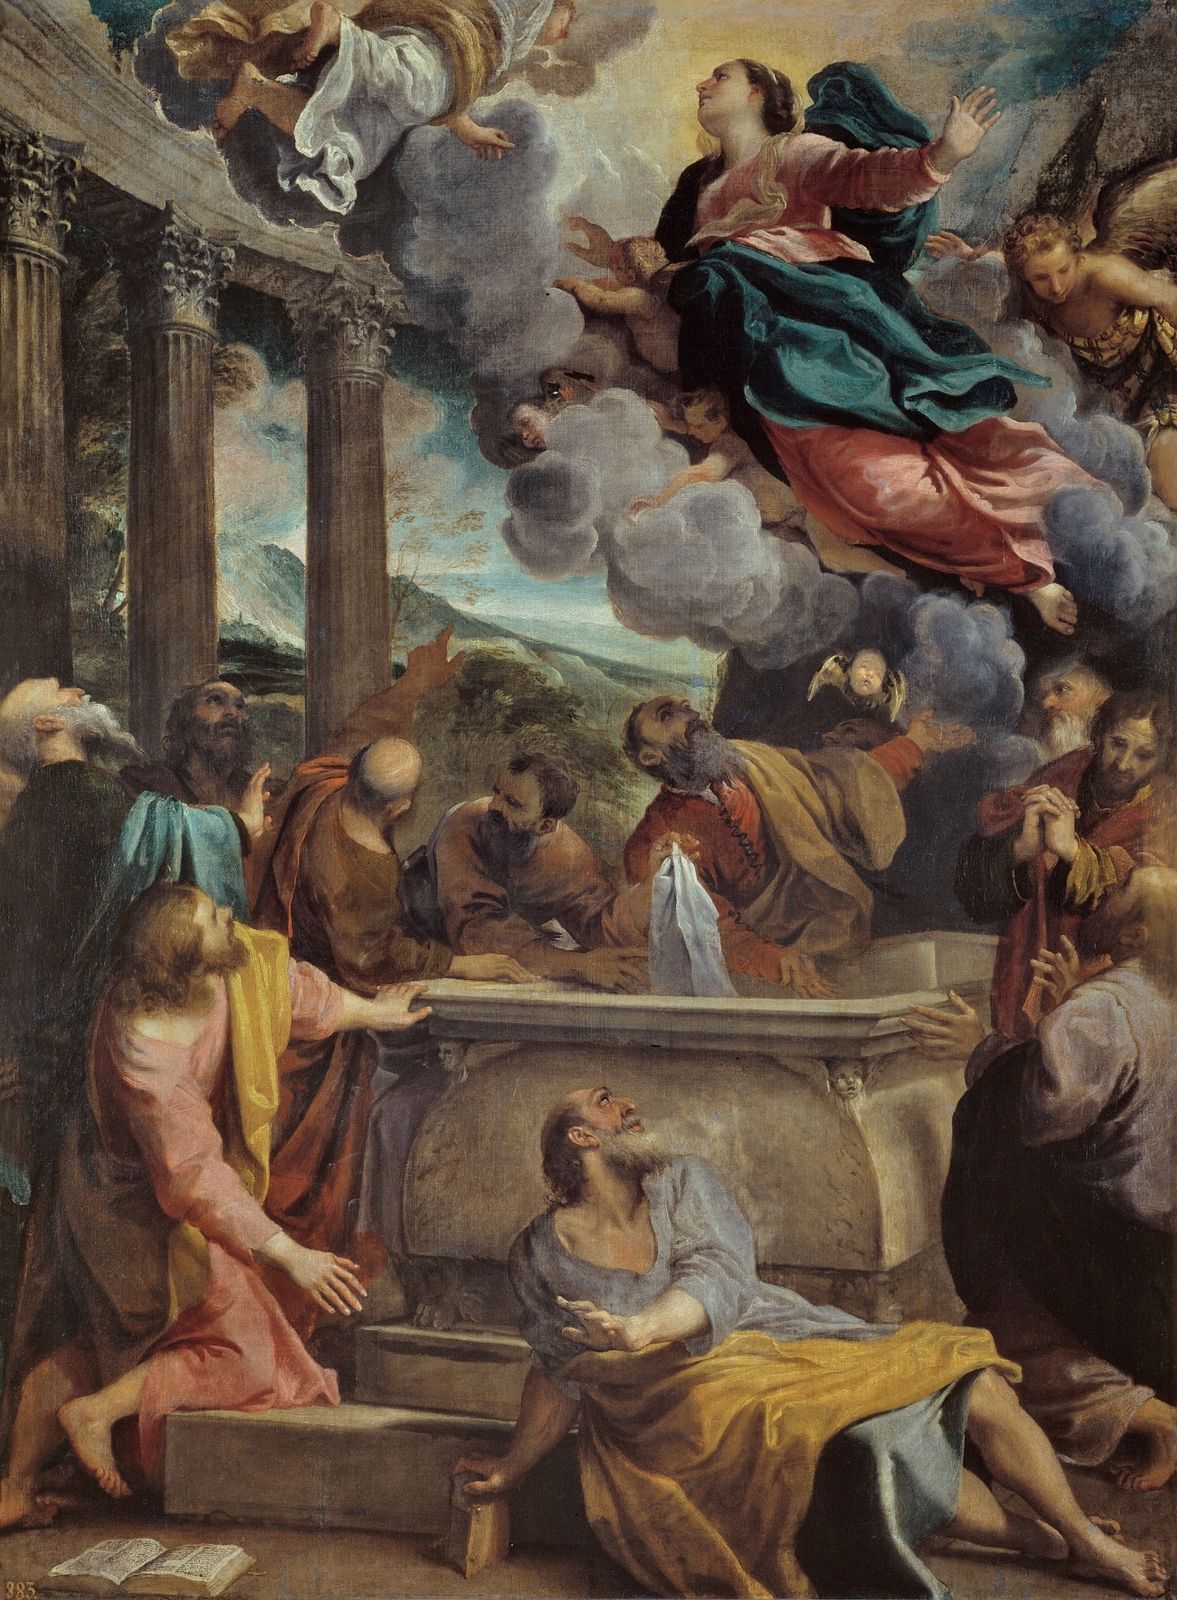 Assumption of the Virgin Mary by Annibale Carracci